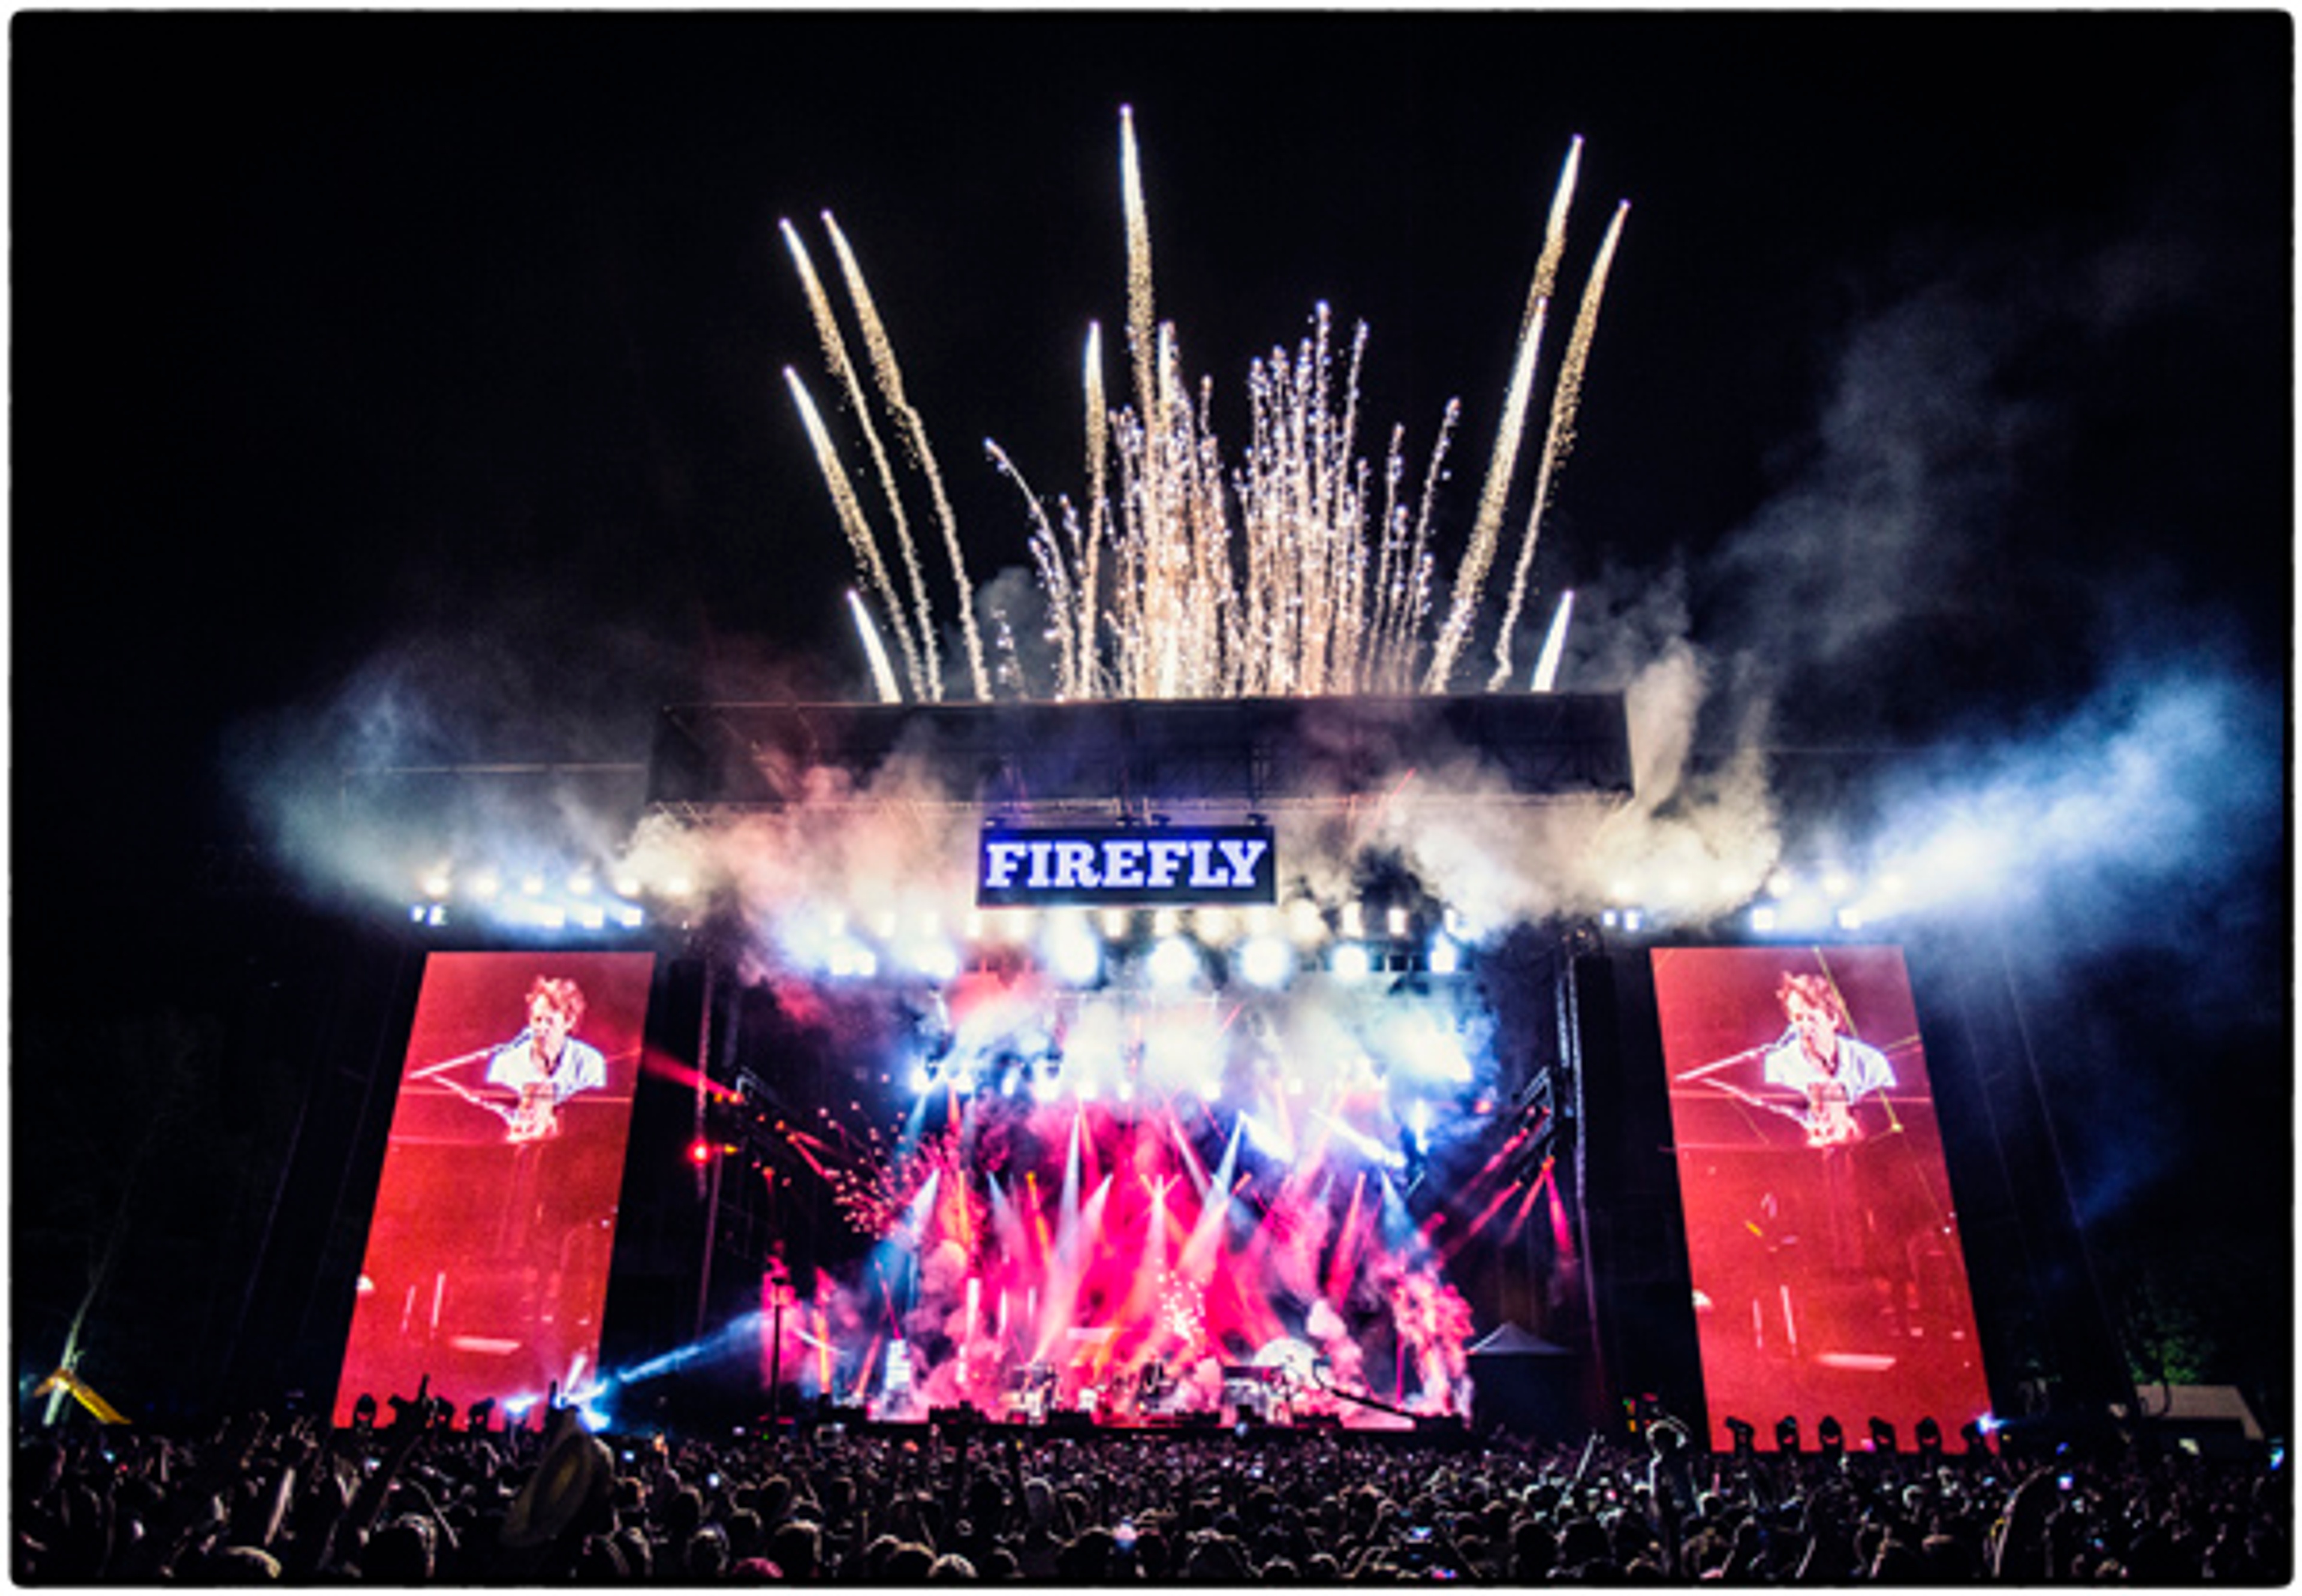 Paul gets #OutThere at the Firefly Music Festival